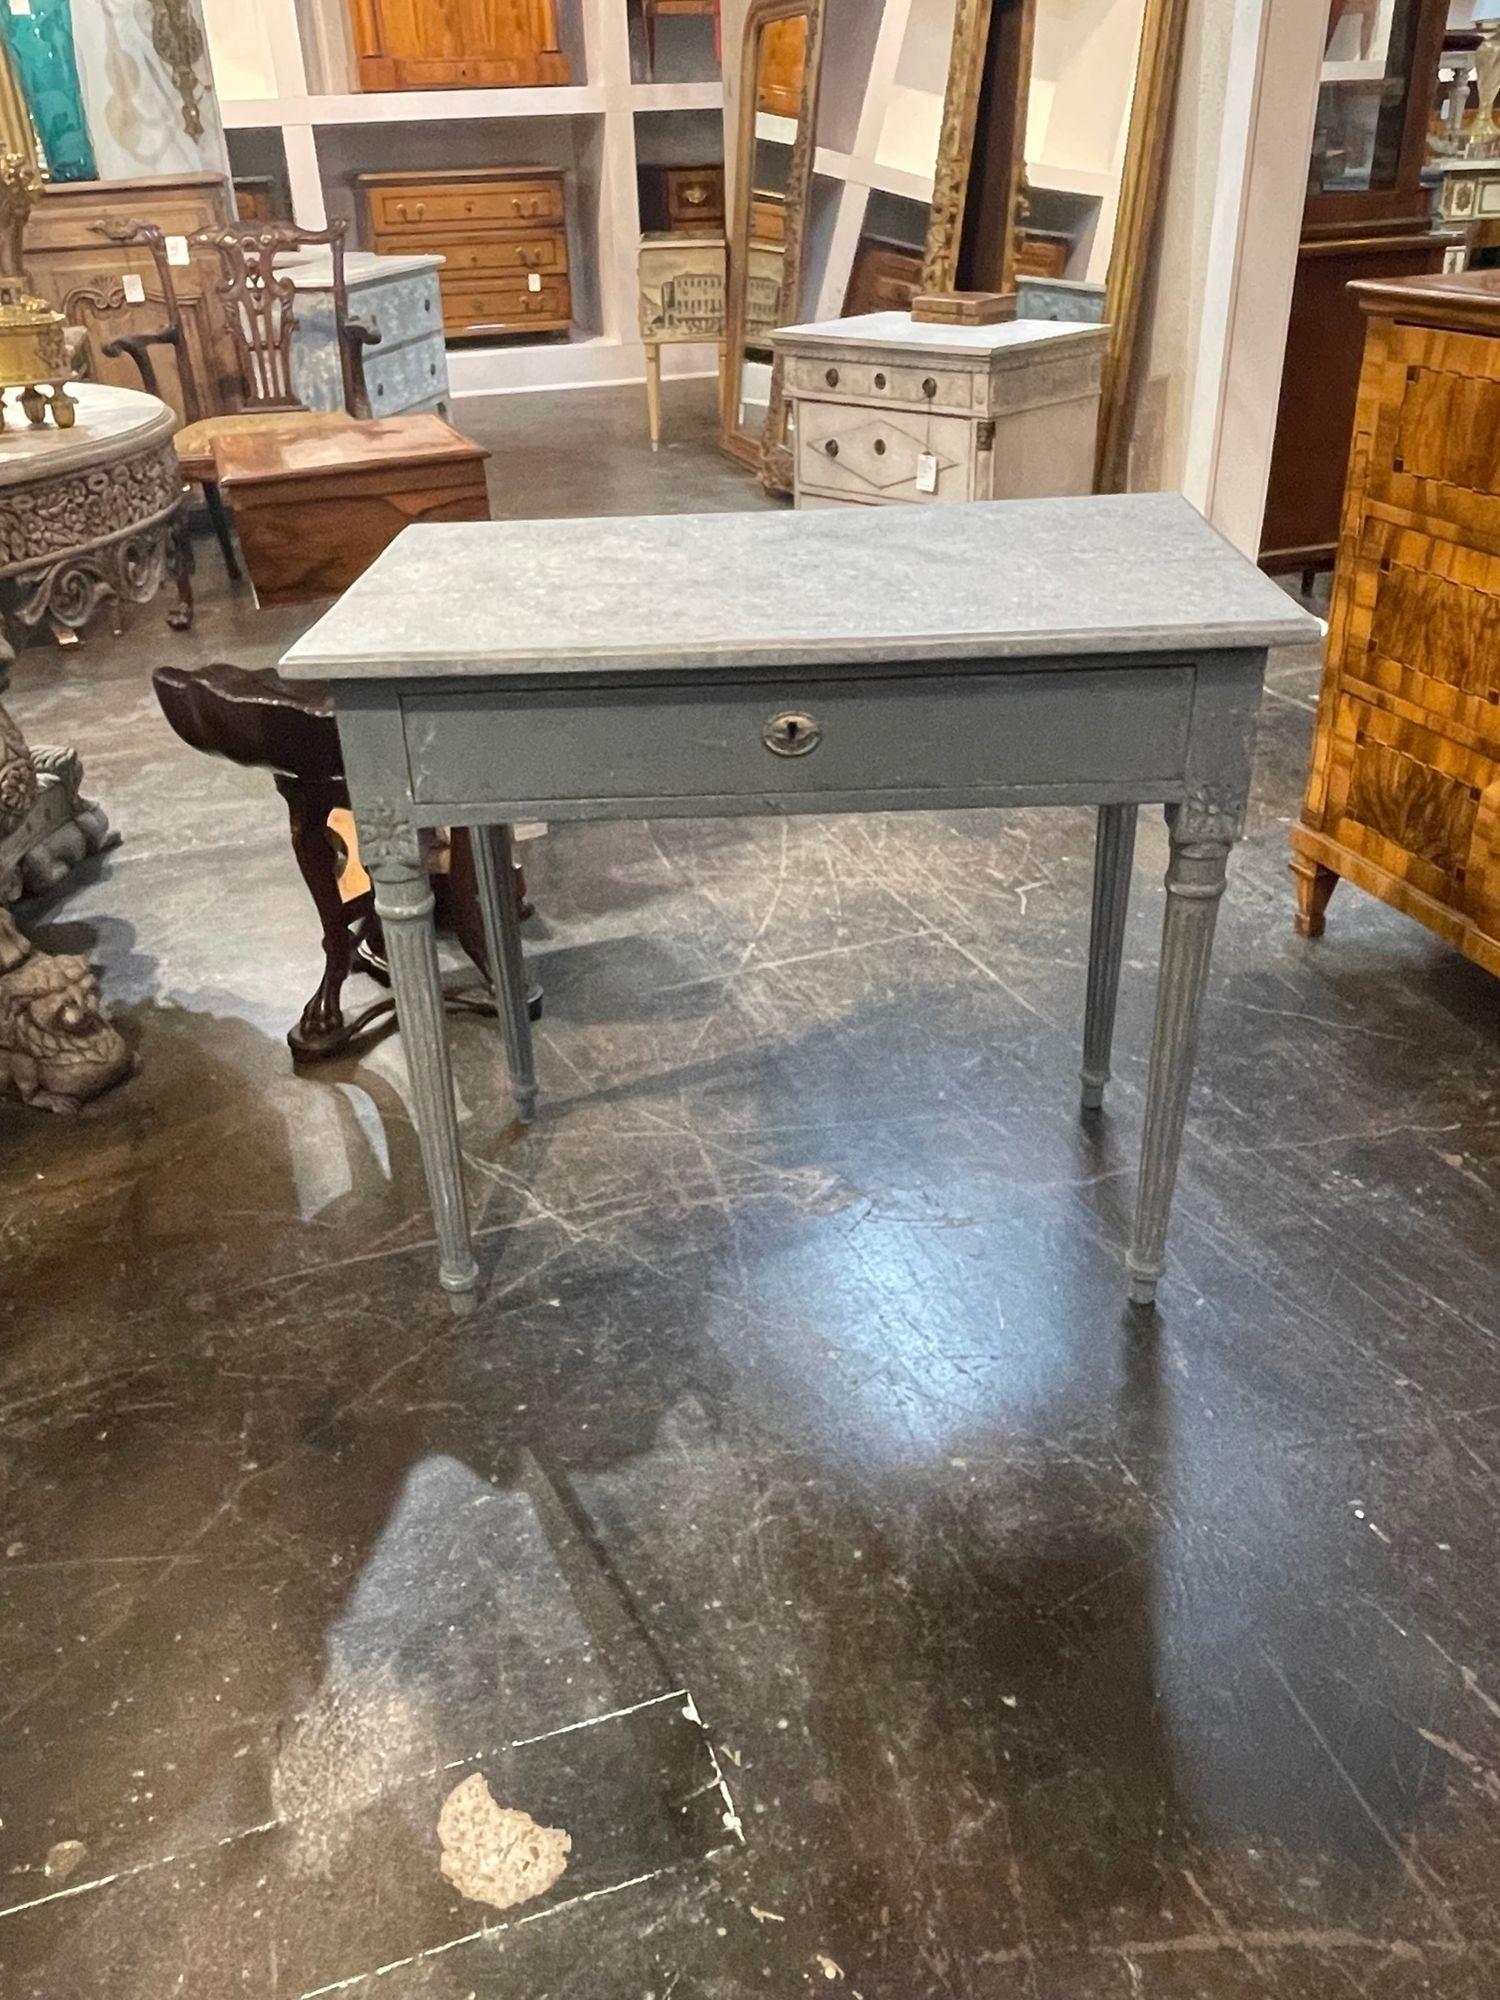 Lovely 19th century Swedish Neo-Classical carved and painted side table. This piece has a pretty grey and white patina and nice clean lines. Great for a variety of decors!